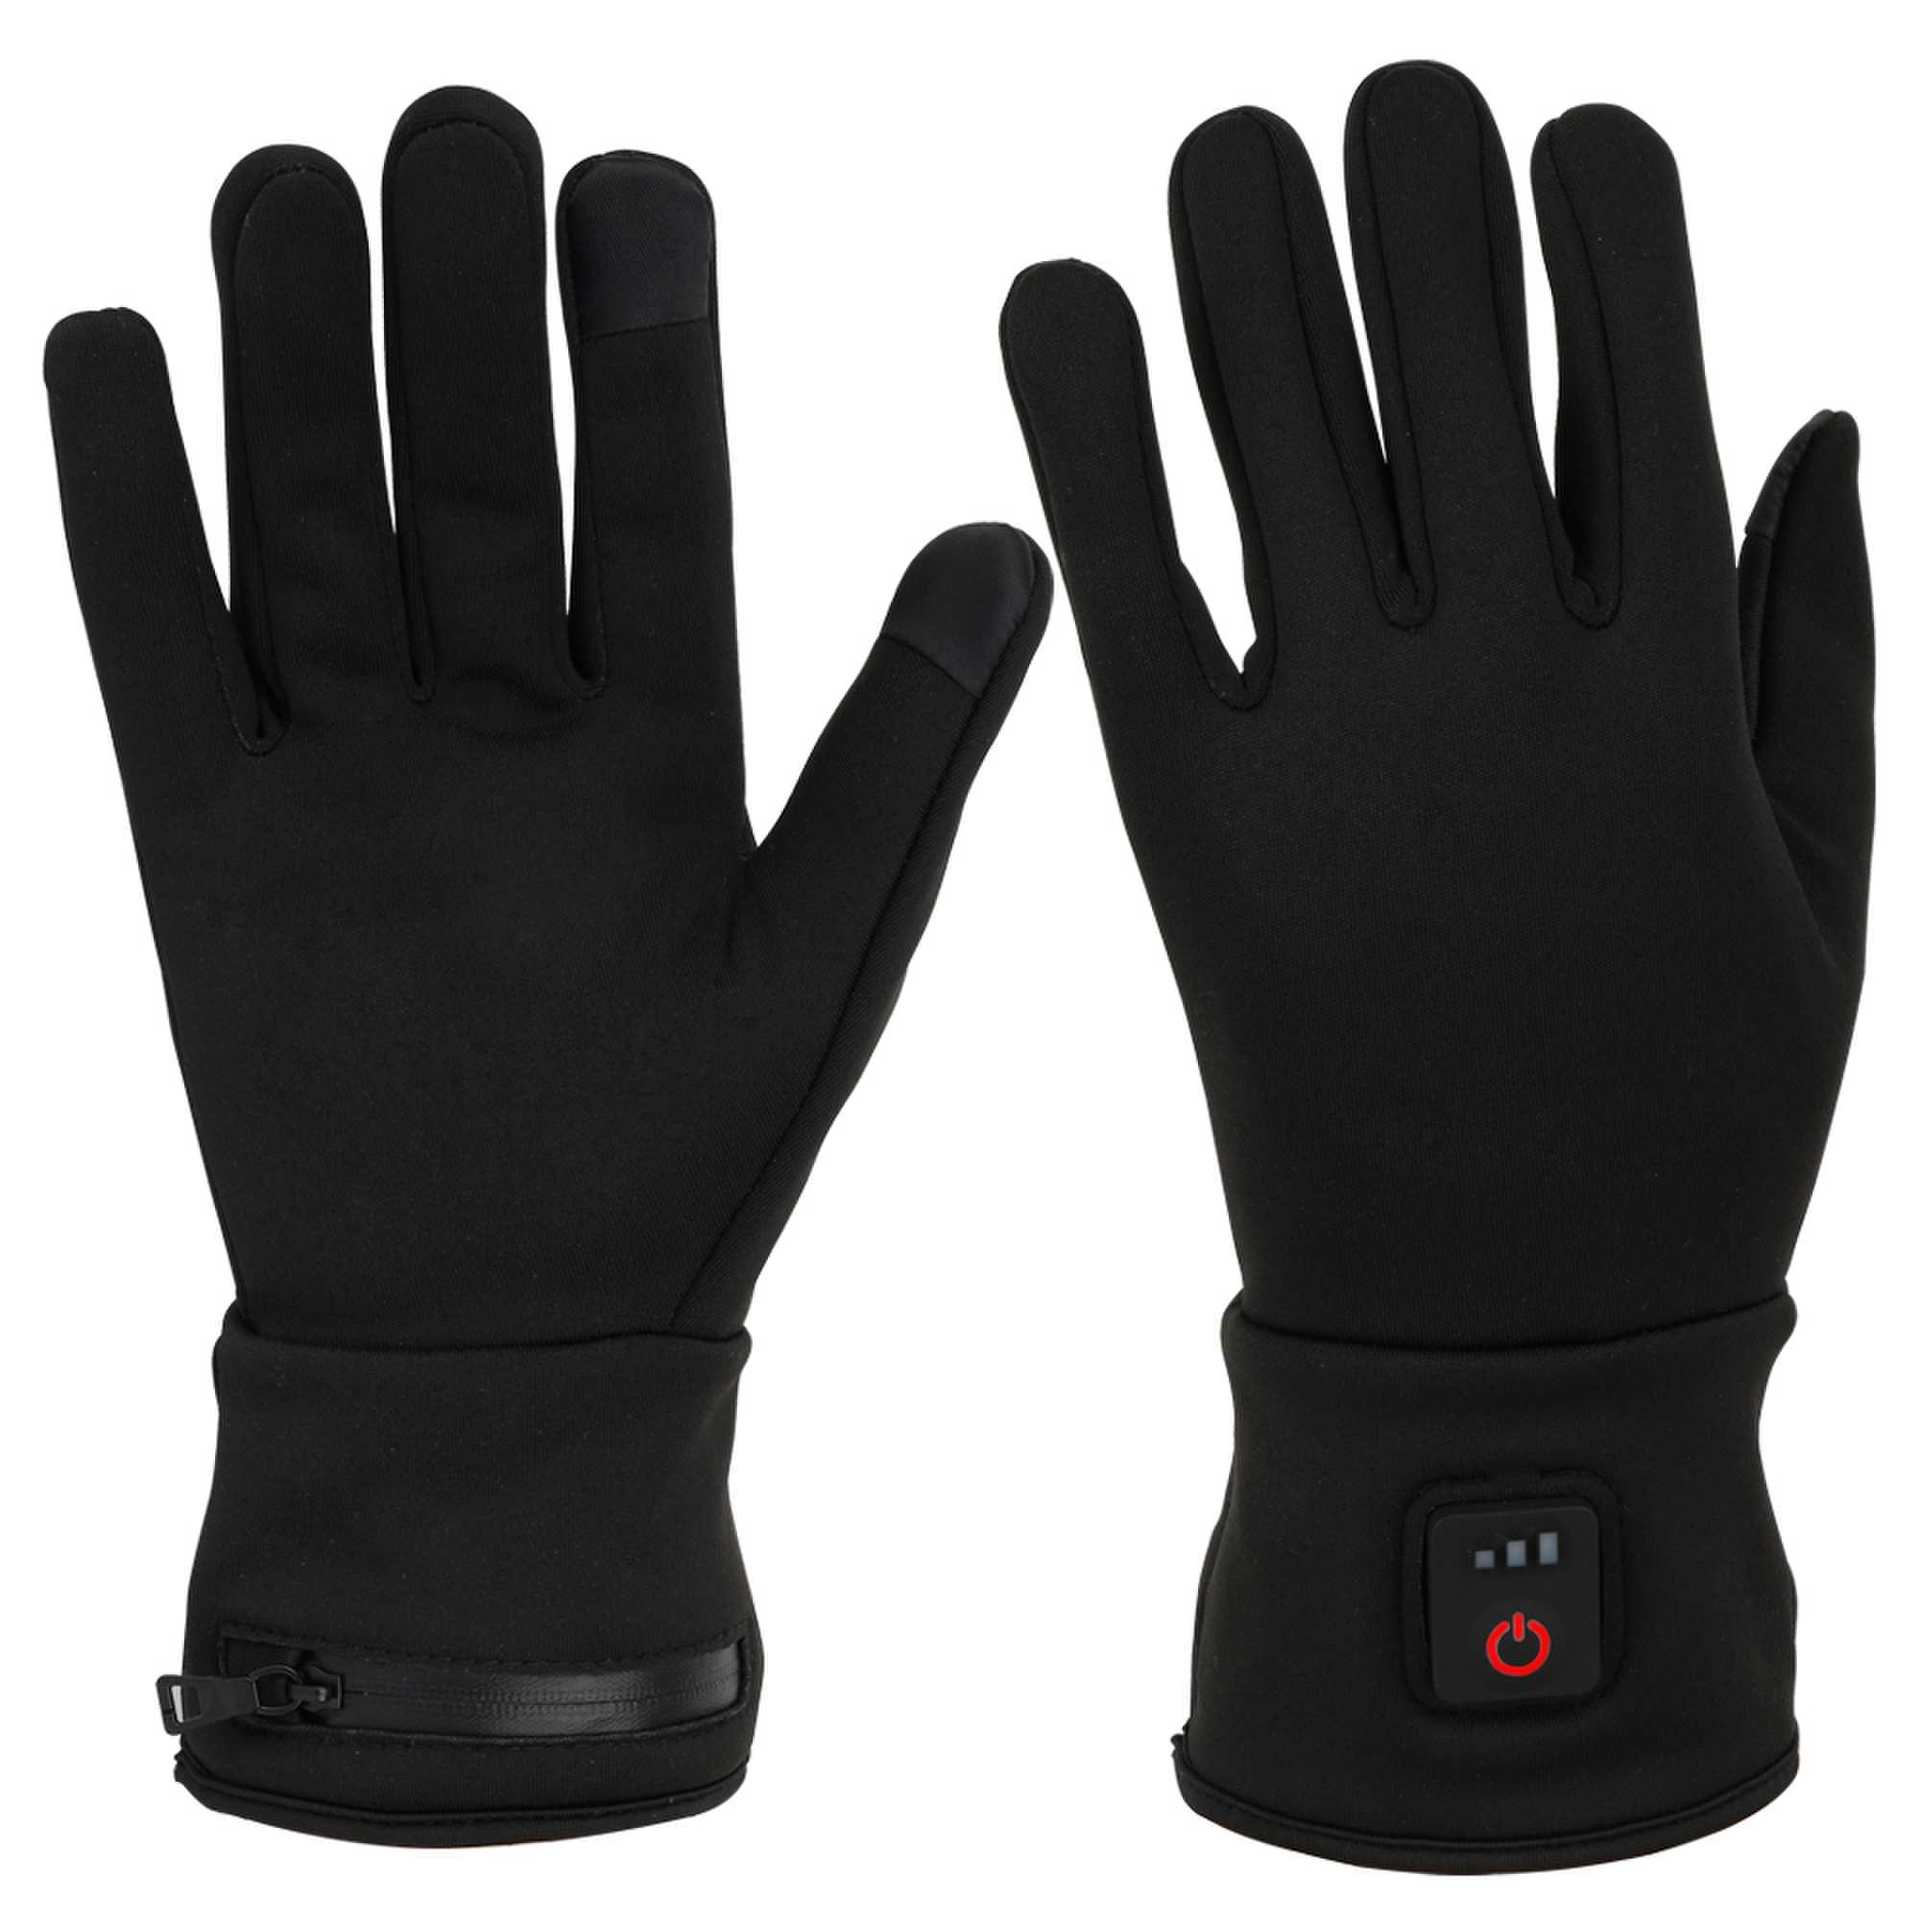 Touch screen Electric Battery Powered Heated Riding Gloves fingertips Ski Heated Gloves